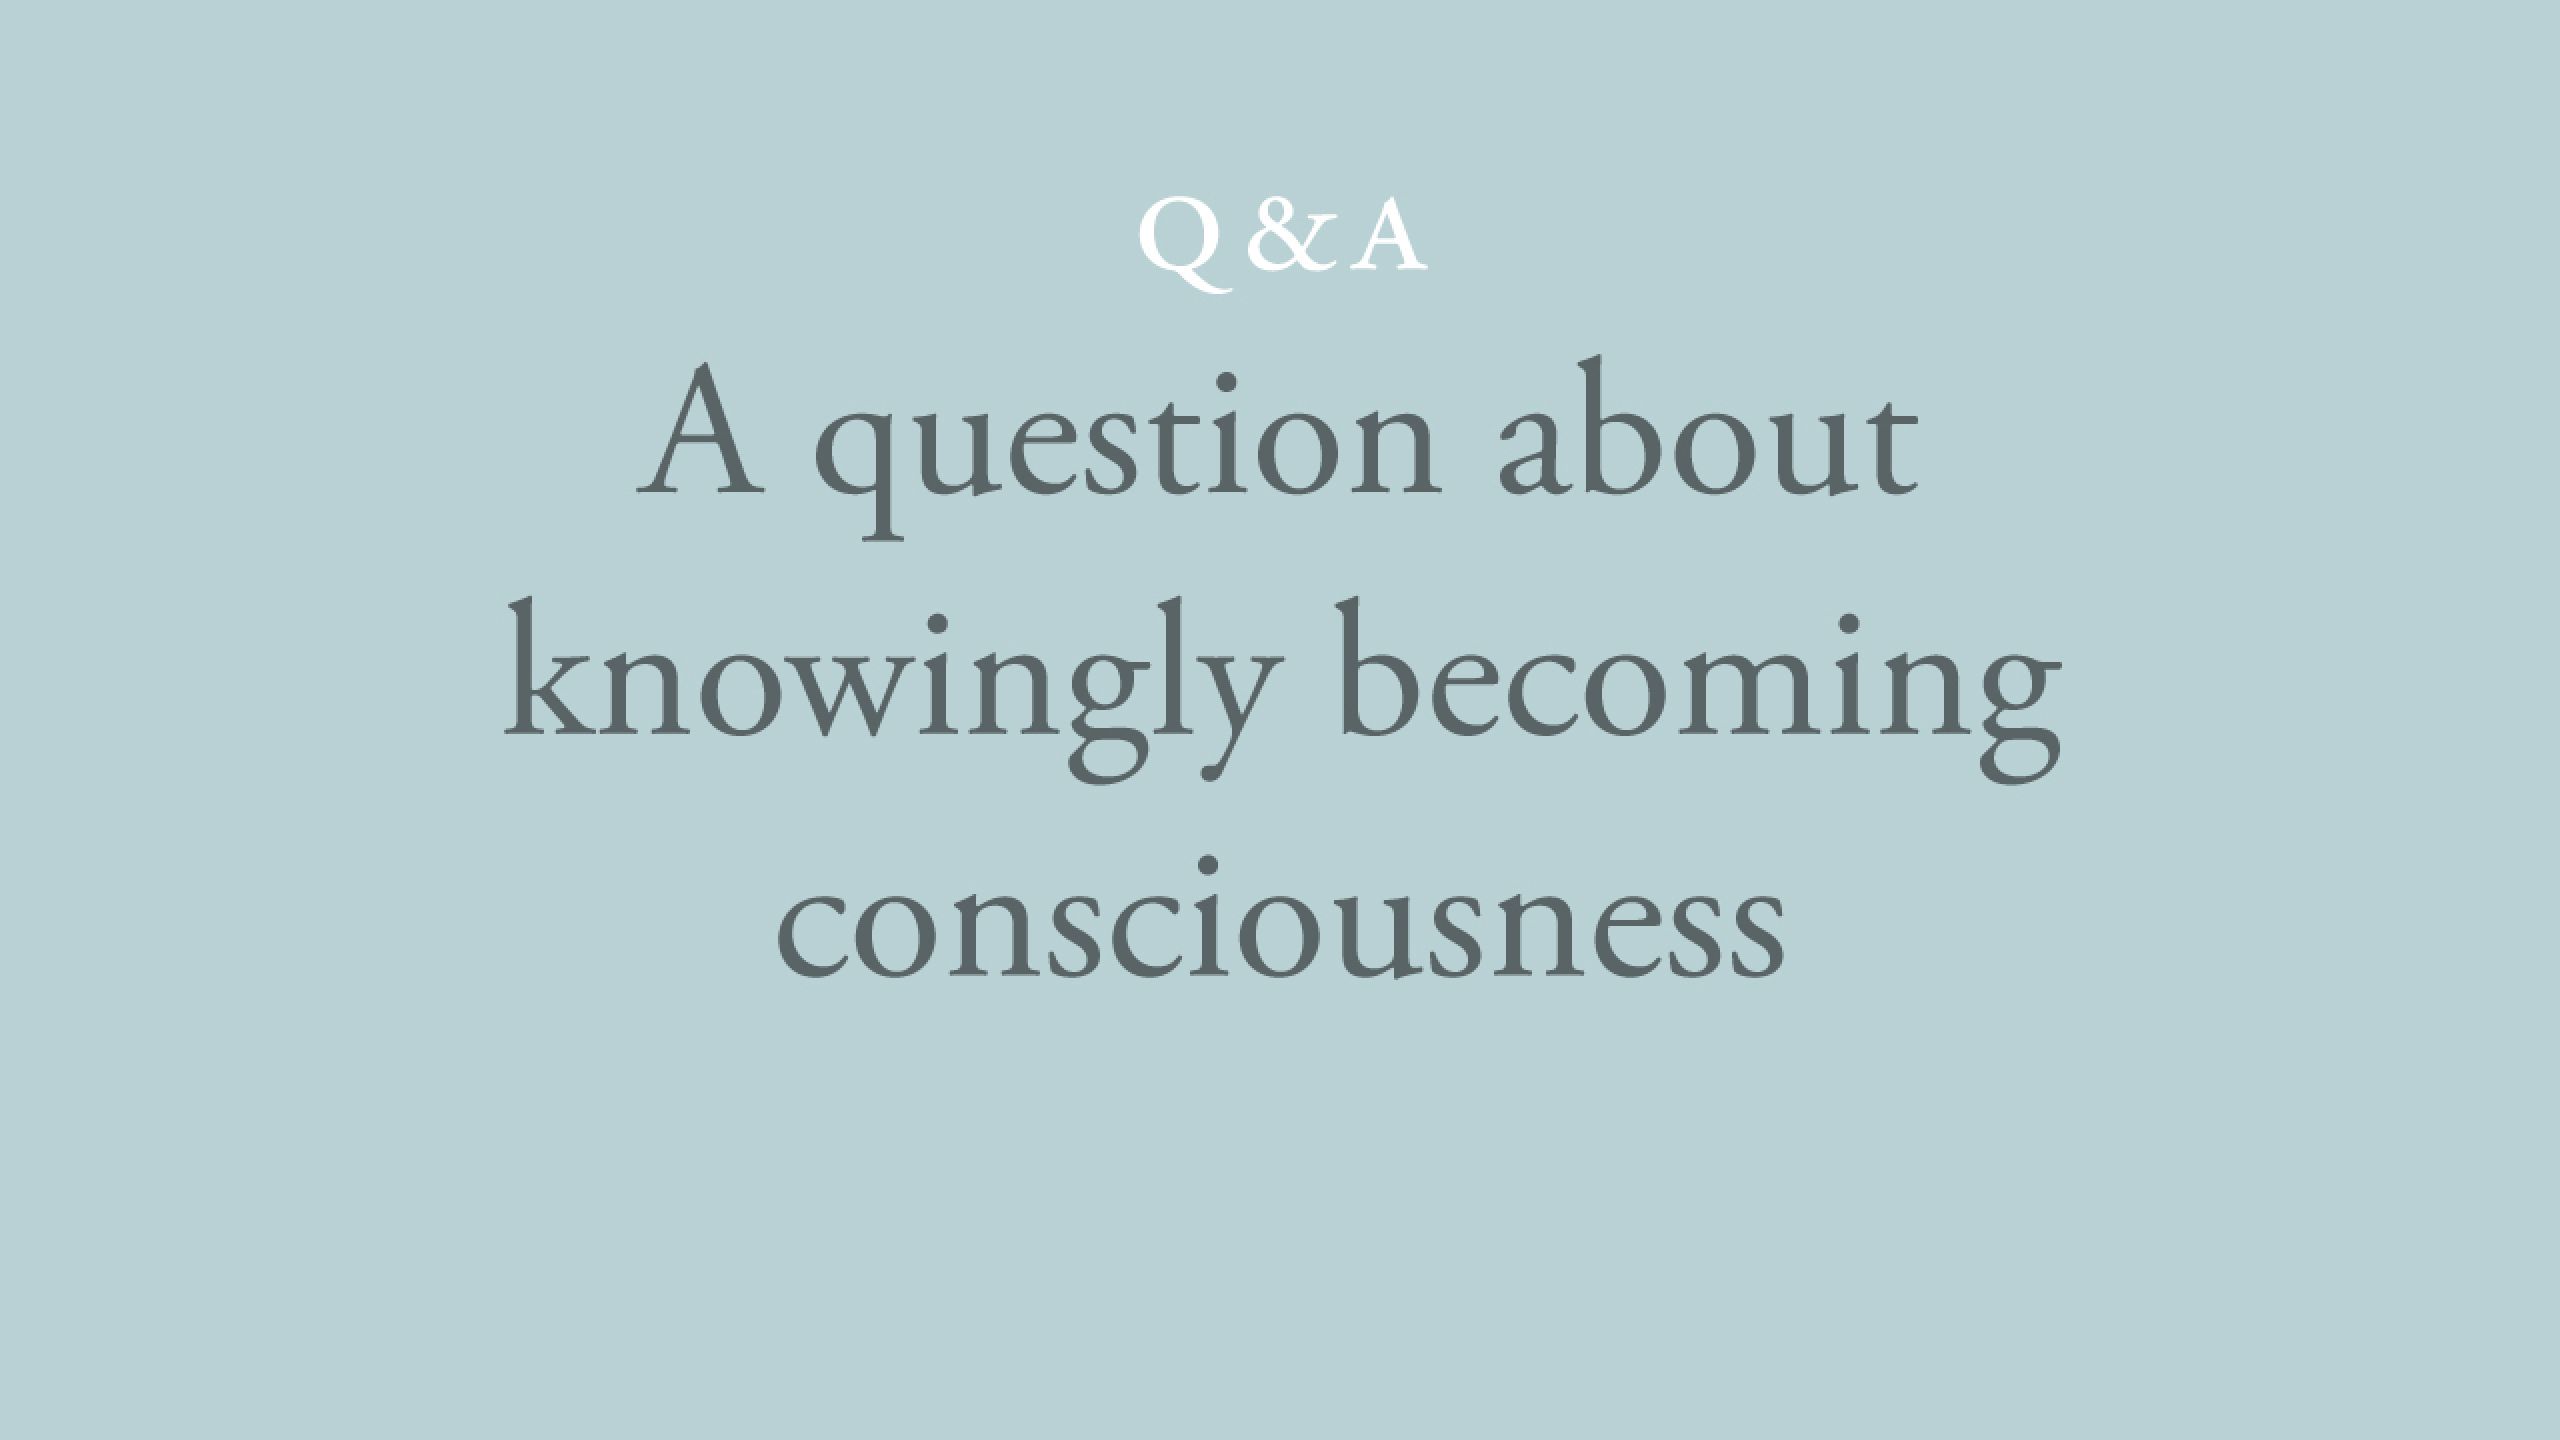 Who is it who wants to knowingly become consciousness?